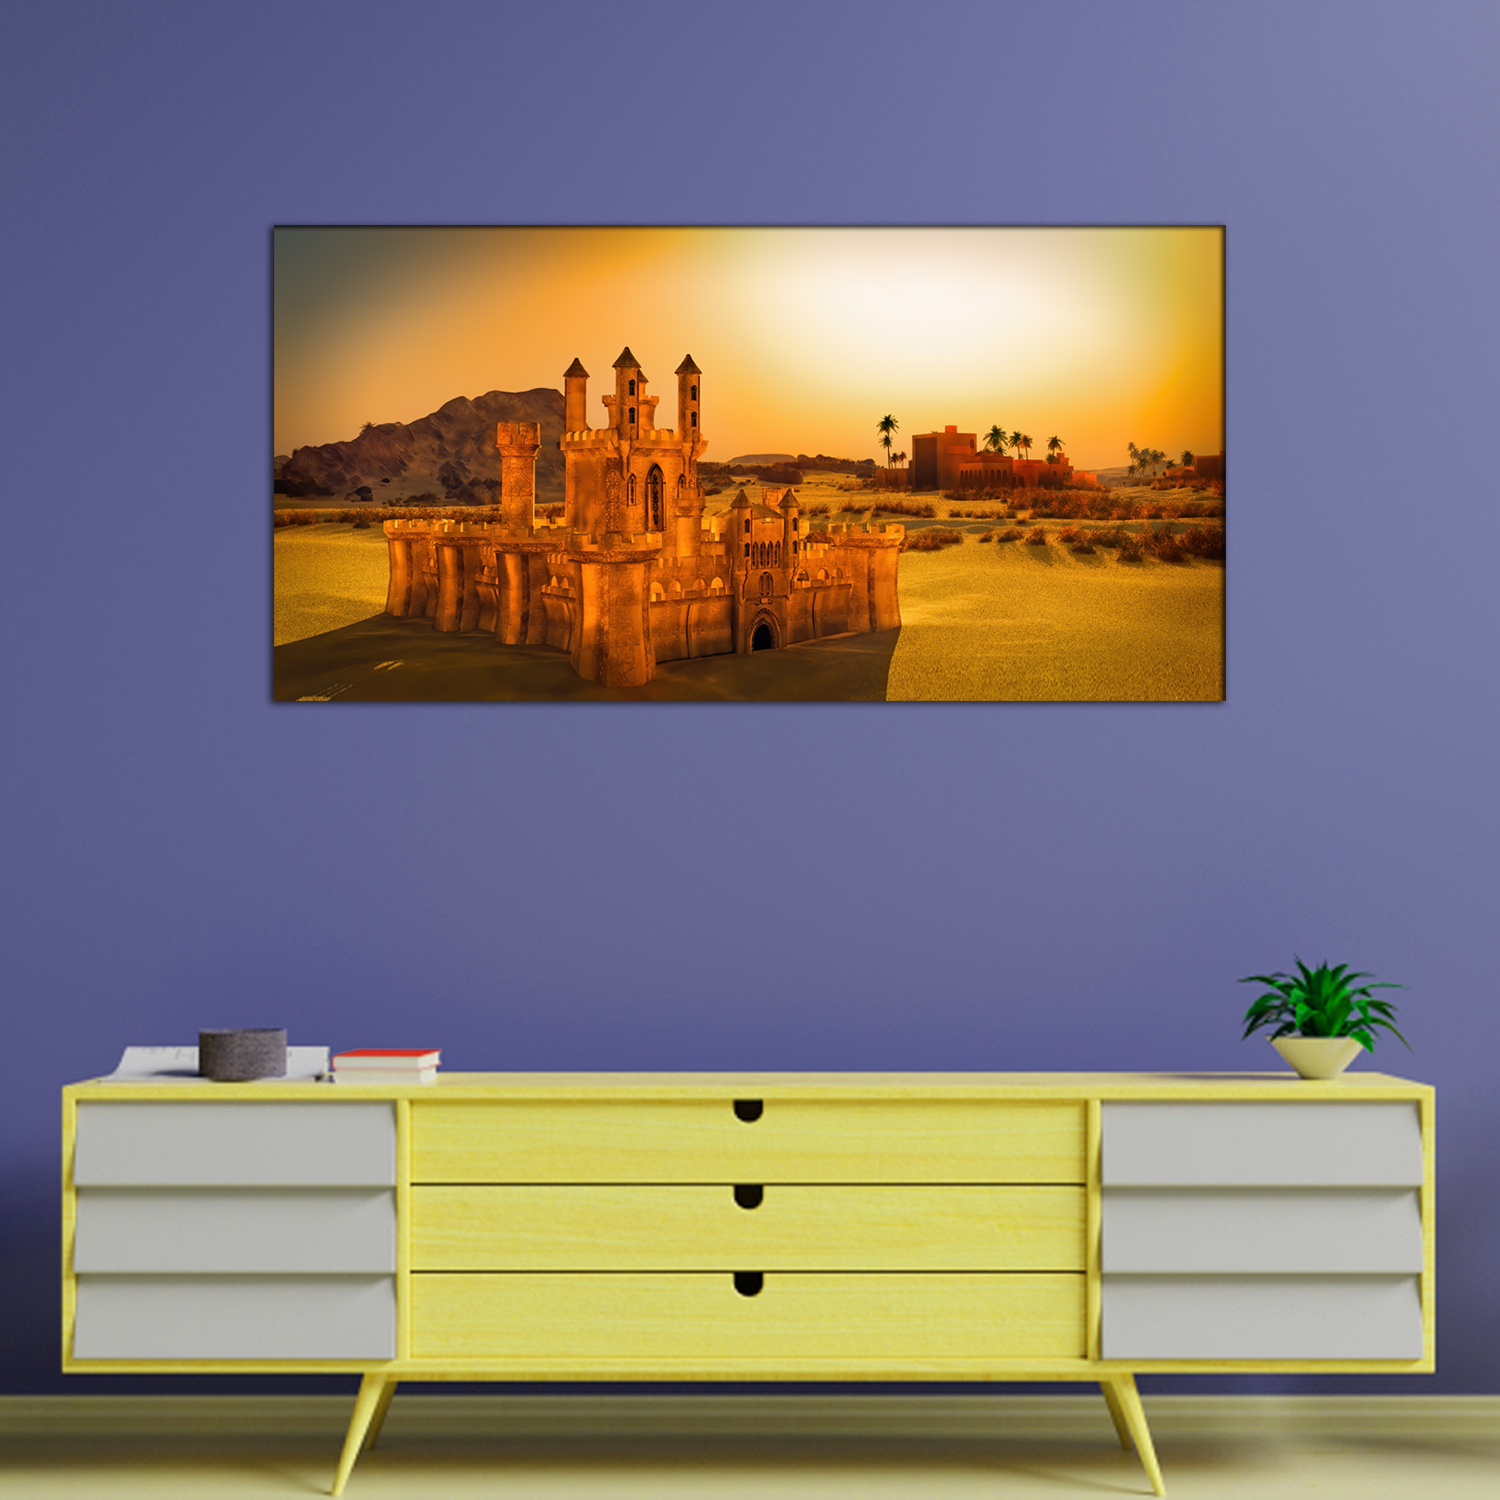 Arabic Small Town on Desert Monument Canvas Wall Painting